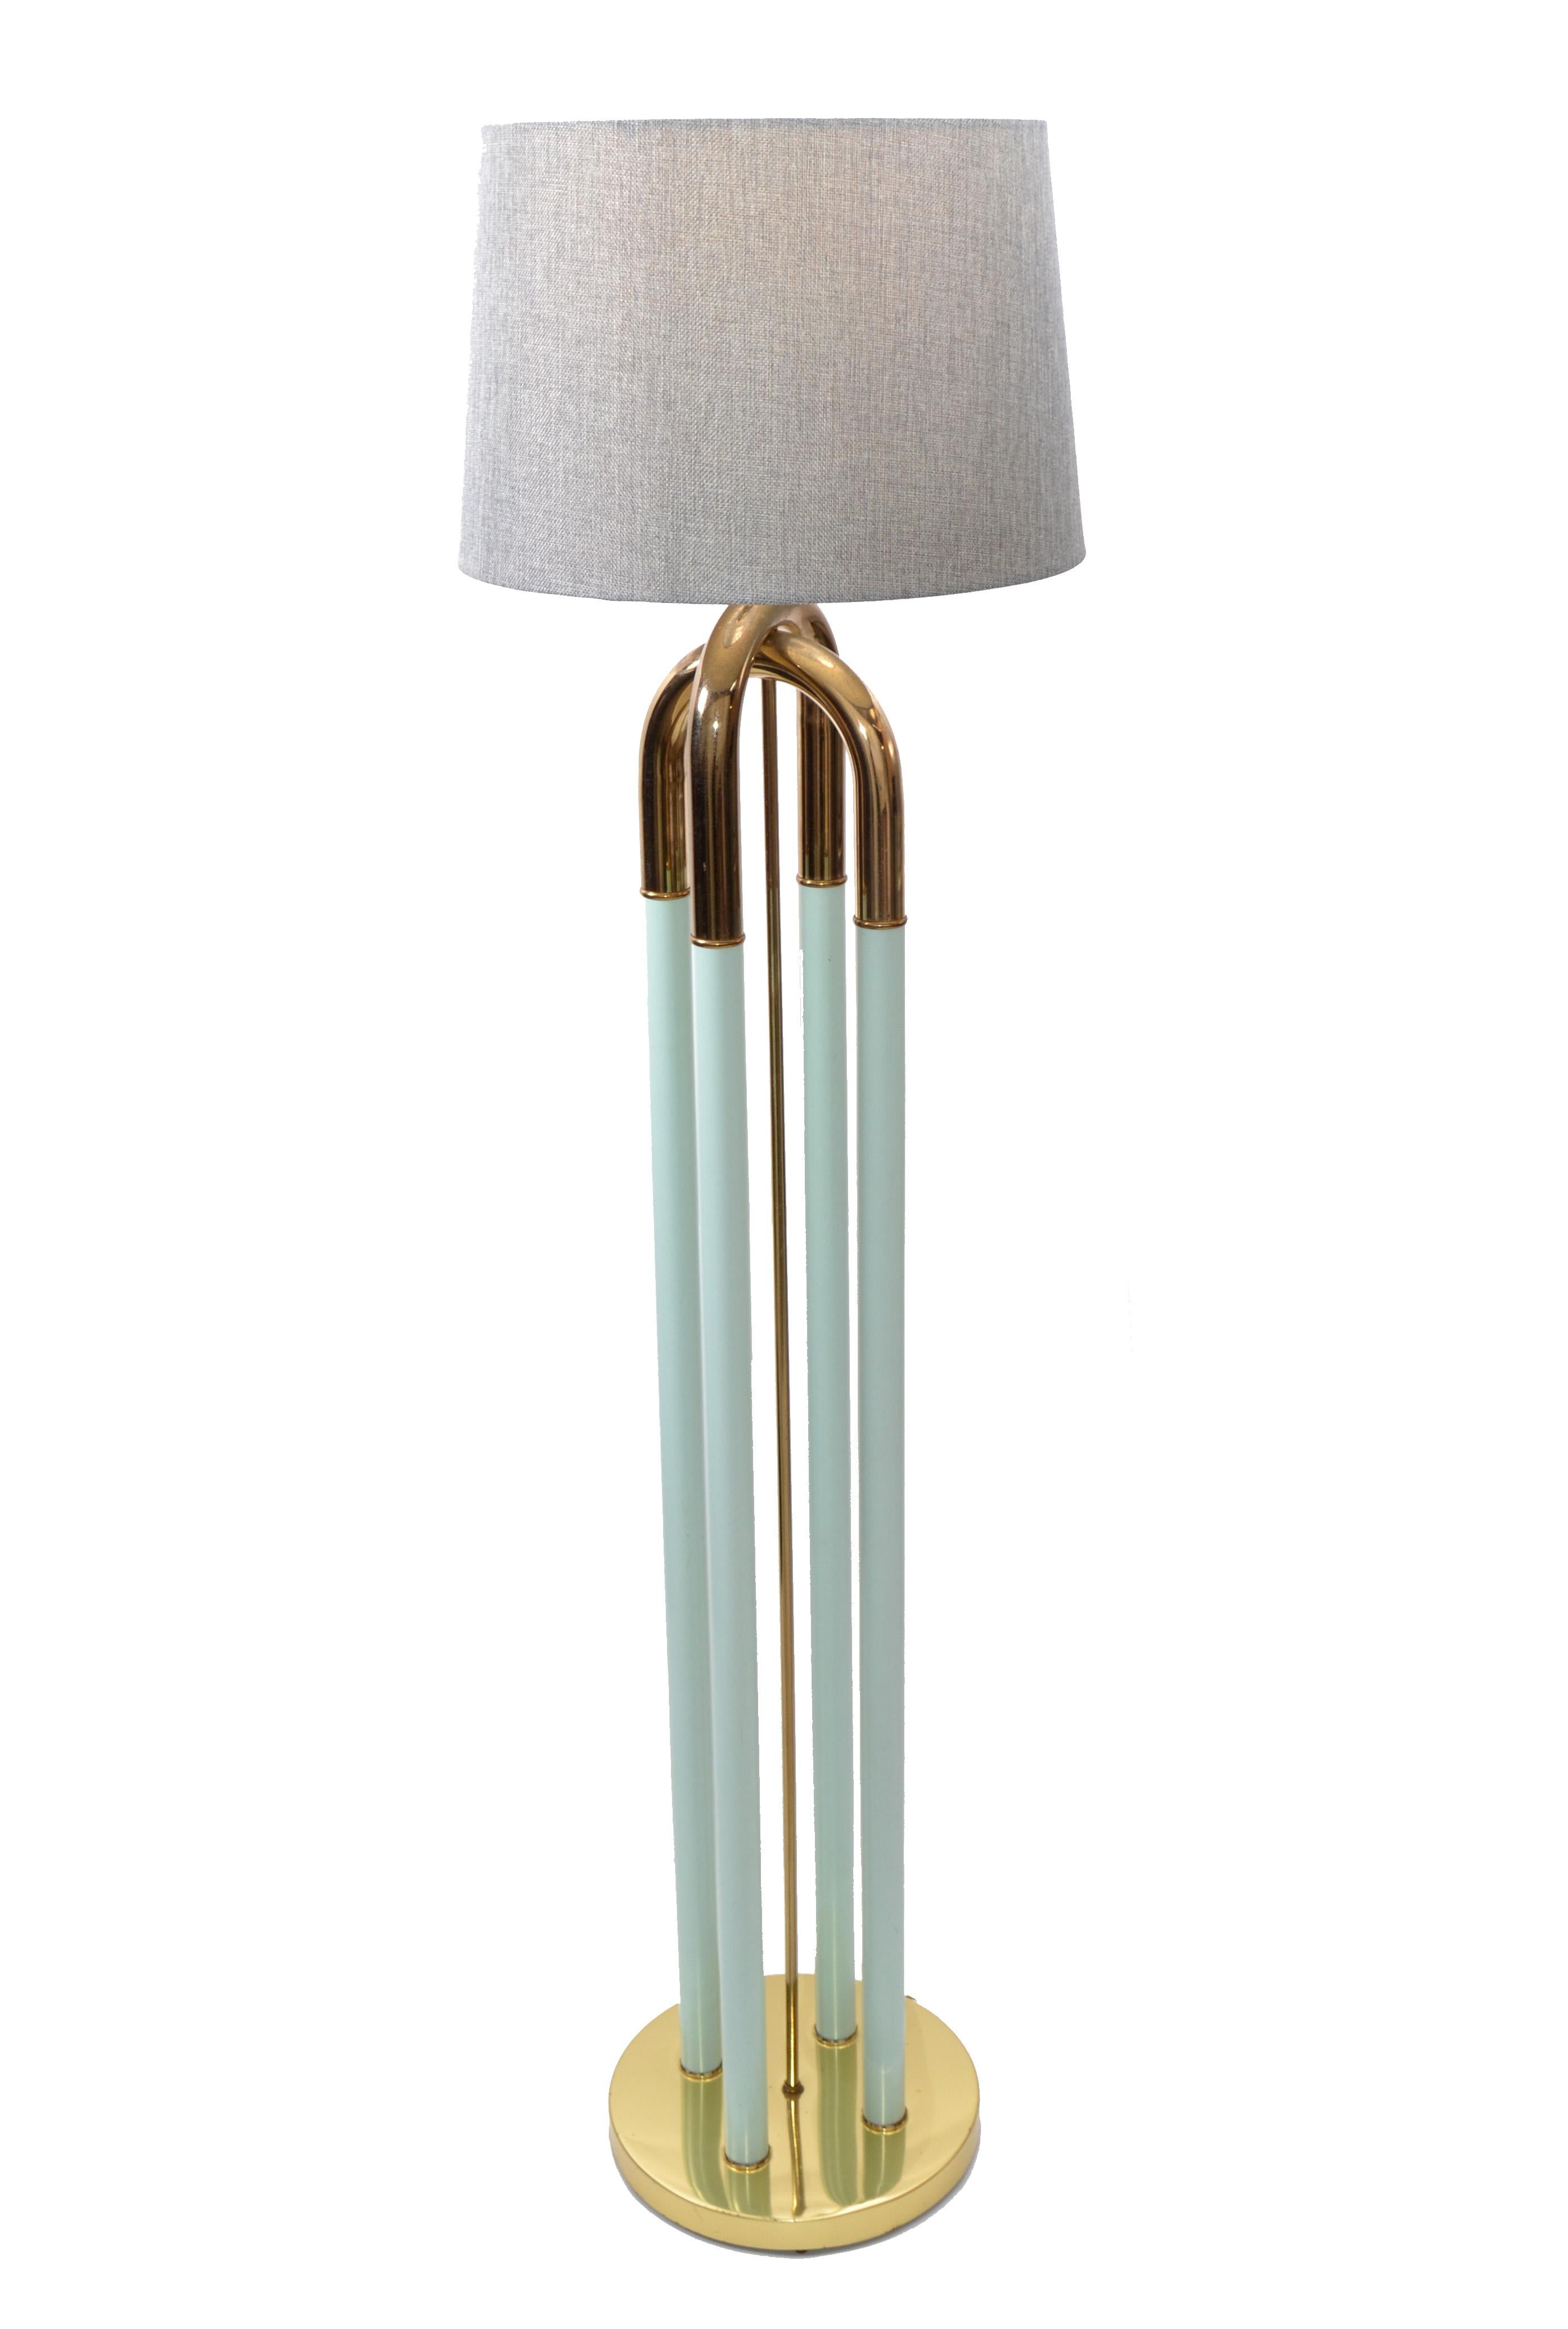 Metal Mid-Century Modern Brass-Plated and Turquoise Enamel Finish Floor Lamp For Sale